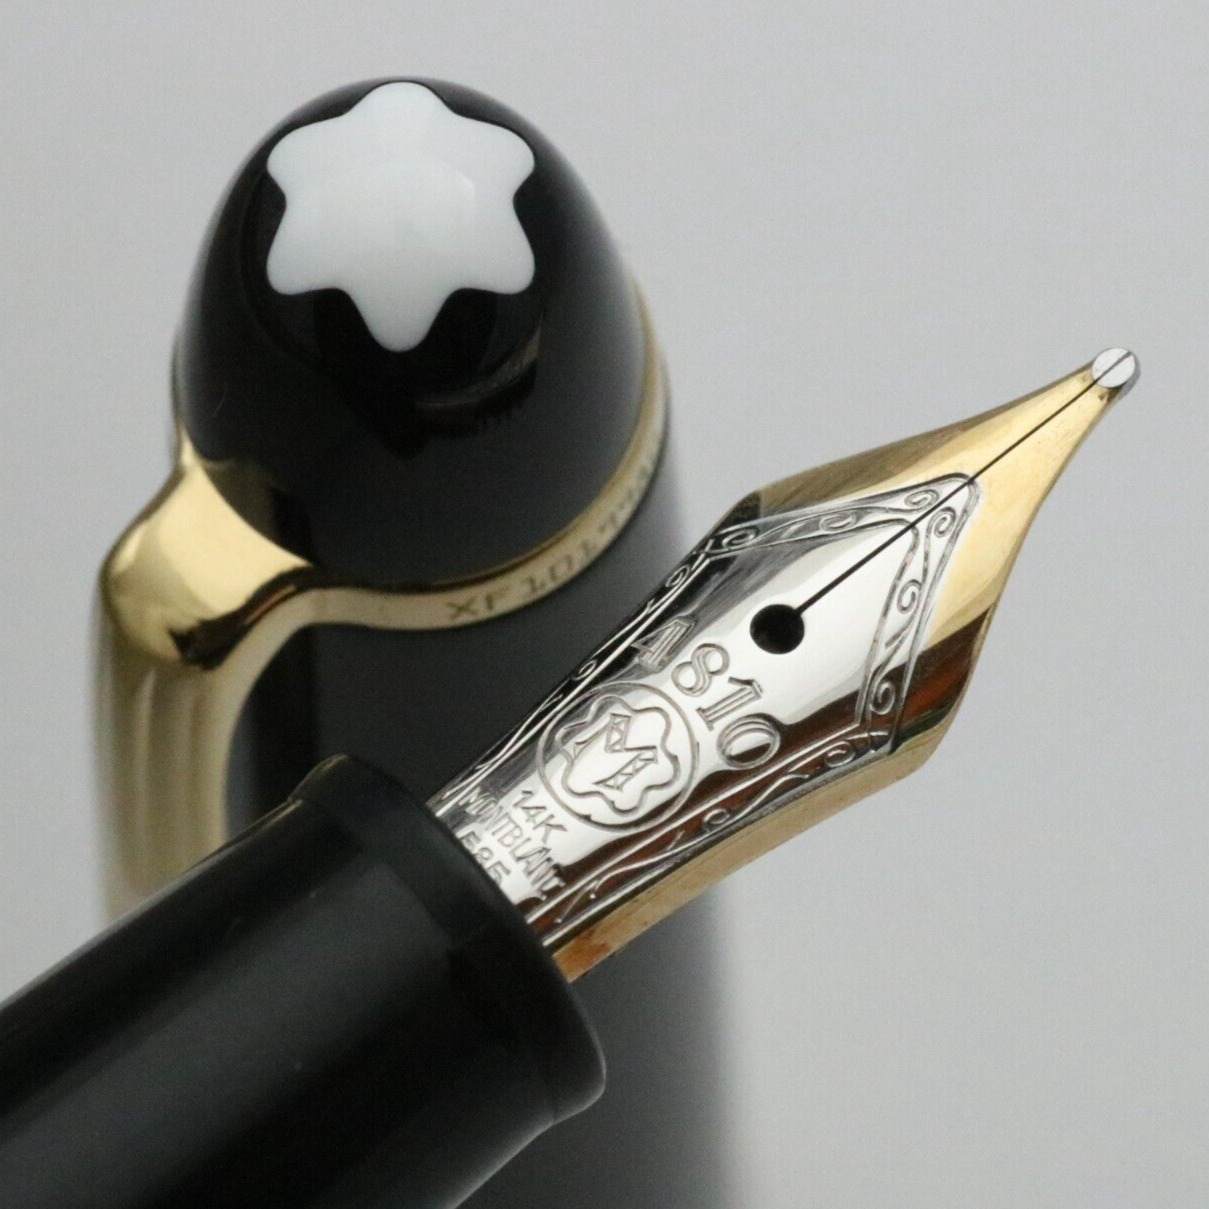 Montblanc No. 145 1990s Vintage 14K 585 M Nib Used in Japan Fountain Pen [004]